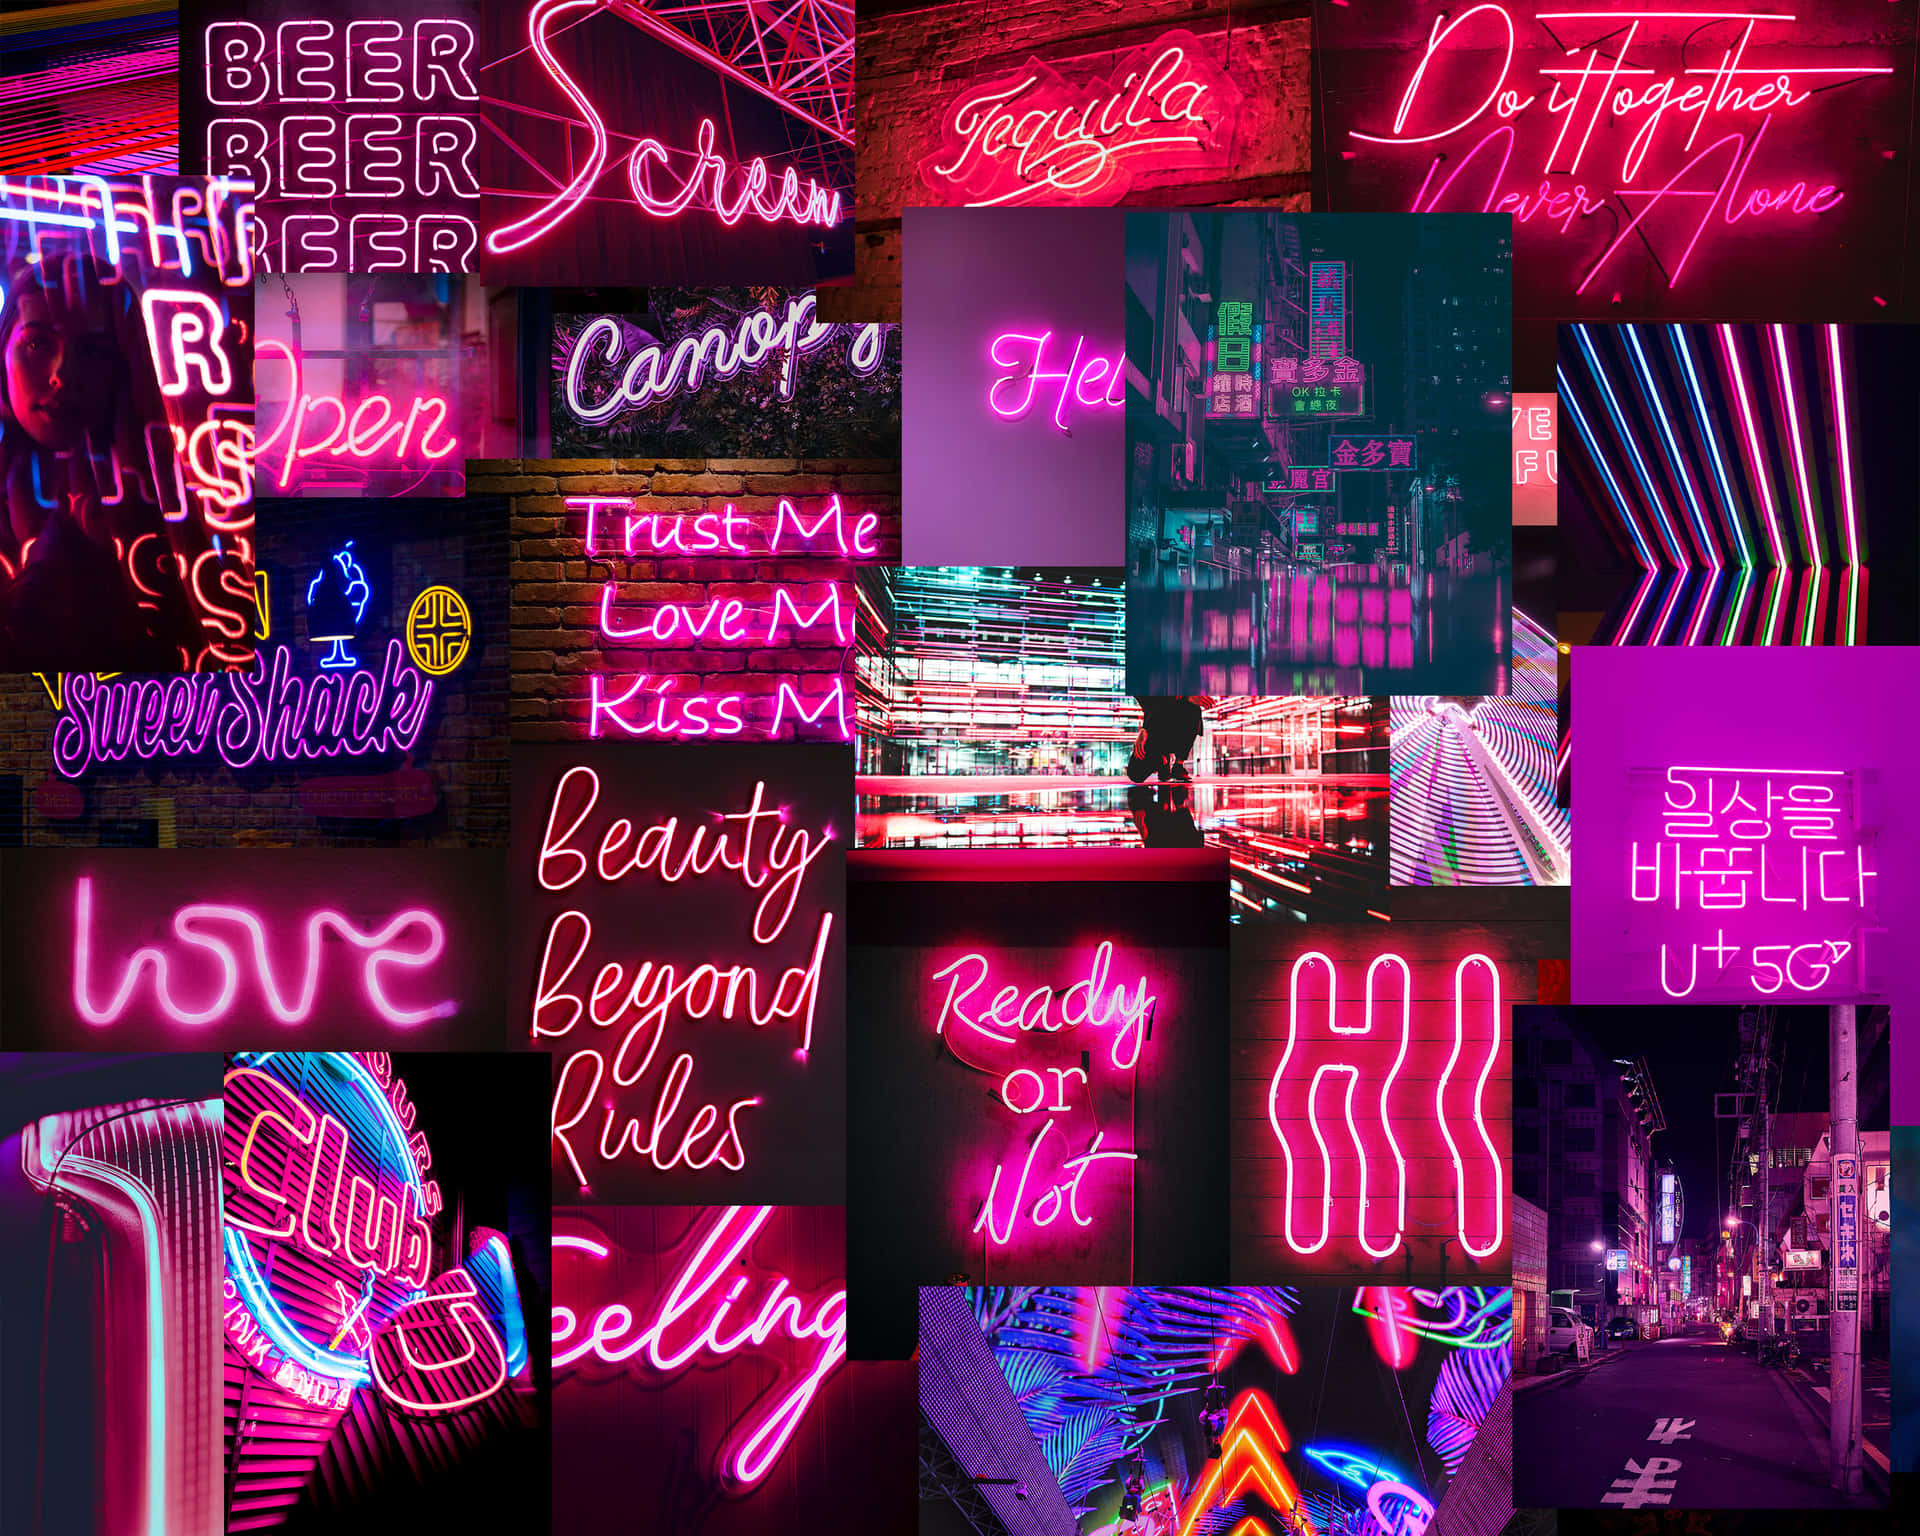 Aesthetic Grunge Neon Signs Collage Art Wallpaper